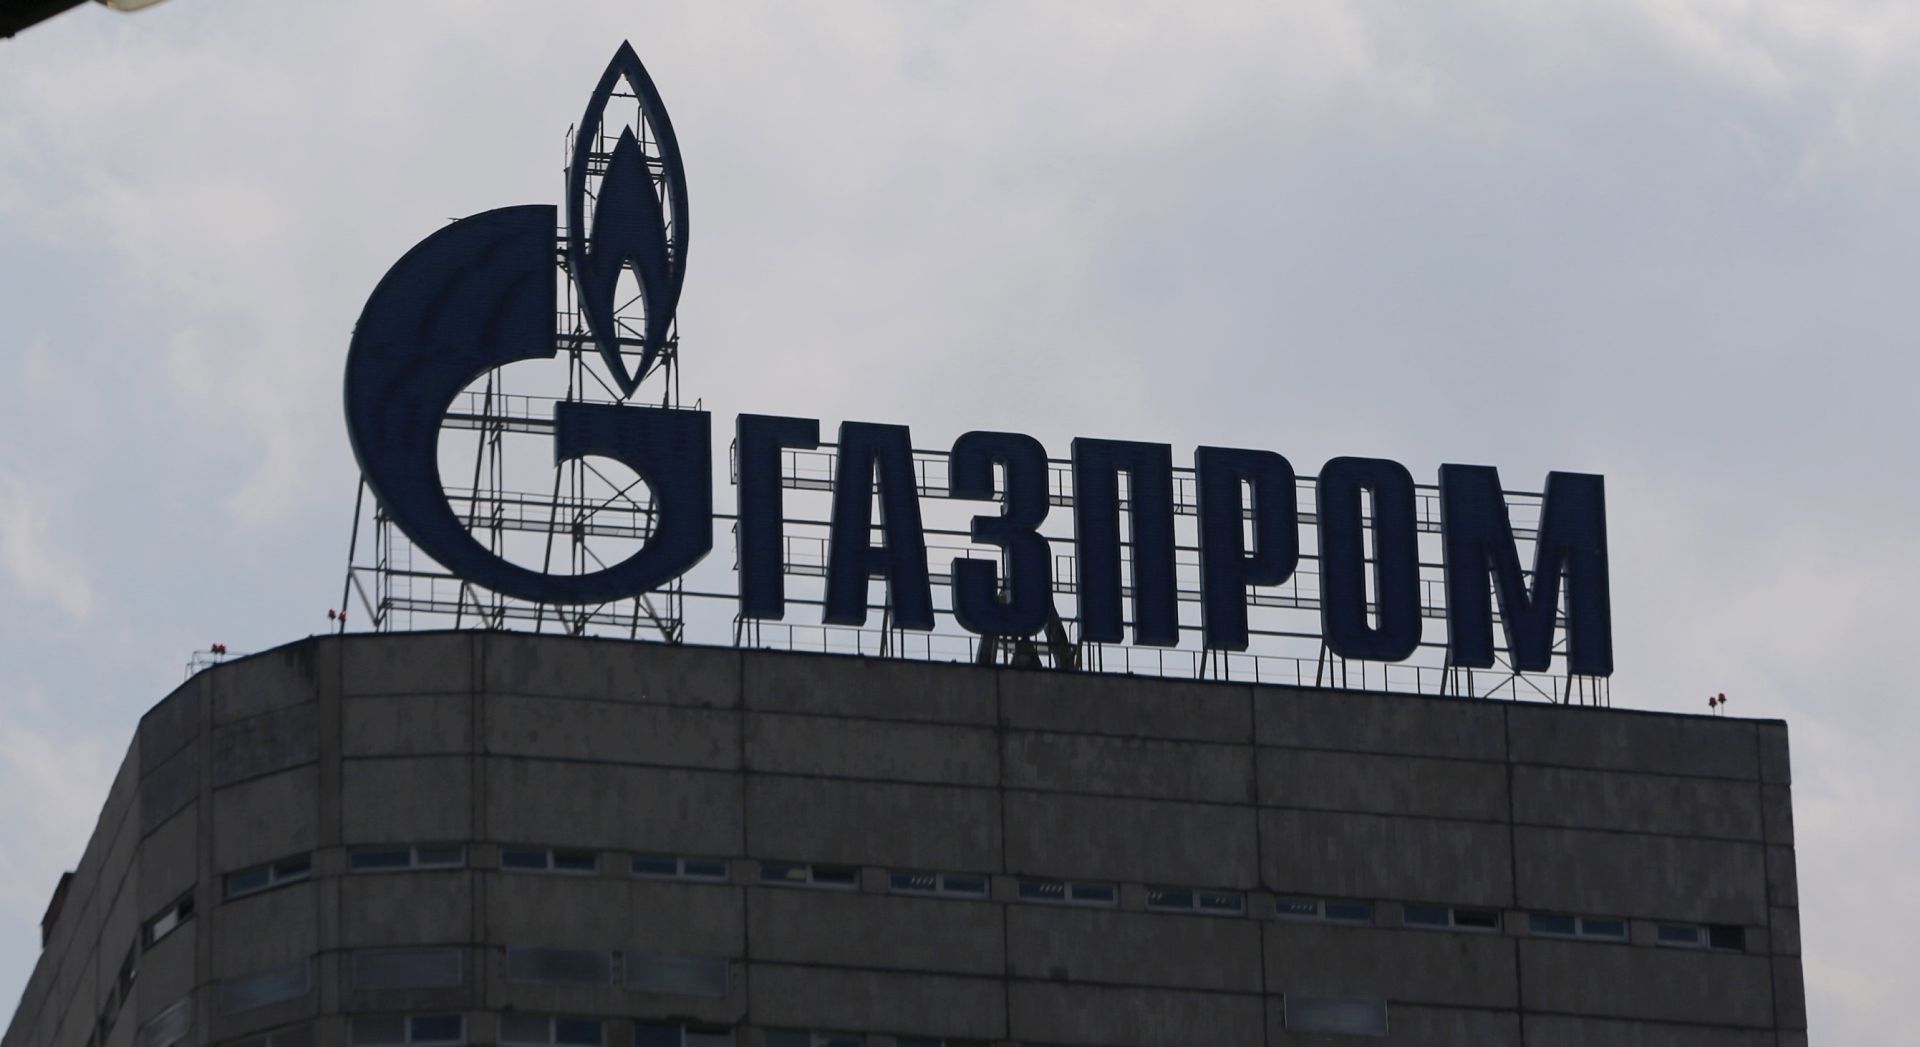 FILE PHOTO: A view shows the company logo of Gazprom installed on the roof of its office building in Moscow FILE PHOTO: A view shows the company logo of Gazprom installed on the roof of its office building in Moscow, August 10, 2015. REUTERS/Maxim Shemetov/File Photo Maxim Shemetov